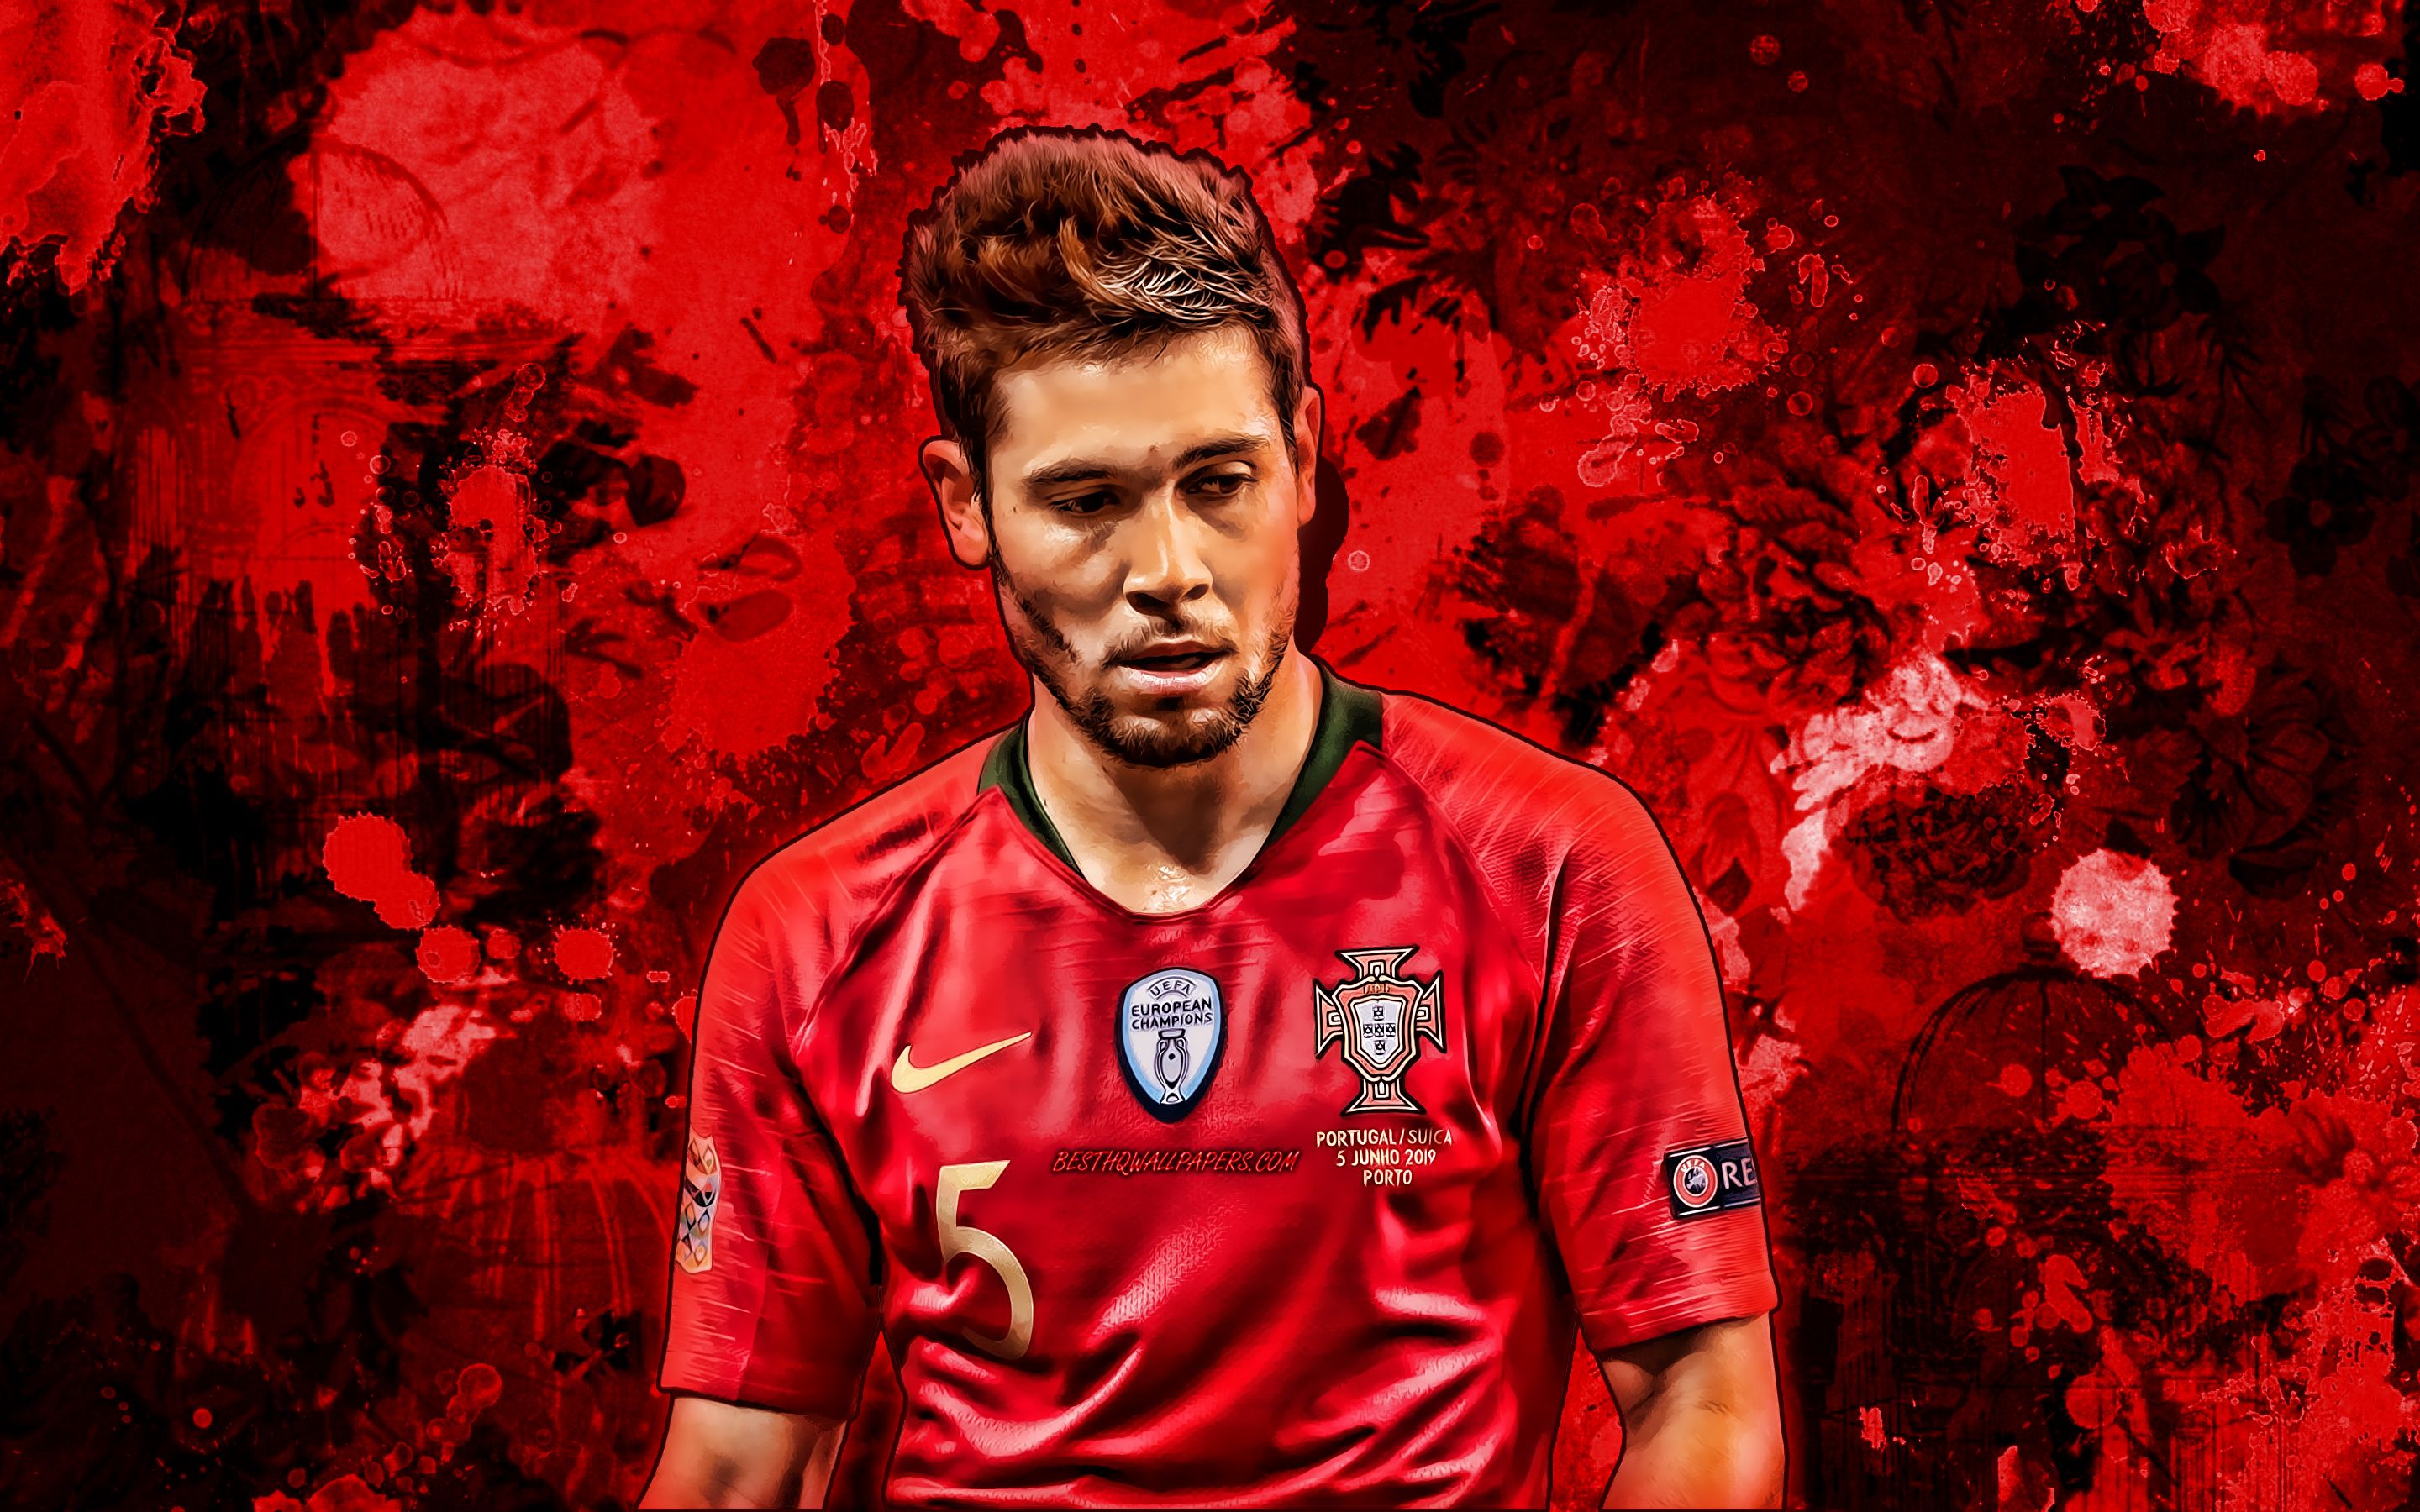 Download wallpaper Raphael Guerreiro, red paint splashes, Portugal national football team, grunge art, Raphael Adelino Jose Guerreiro, soccer, Portuguese National Team, creative for desktop with resolution 2880x1800. High Quality HD picture wallpaper